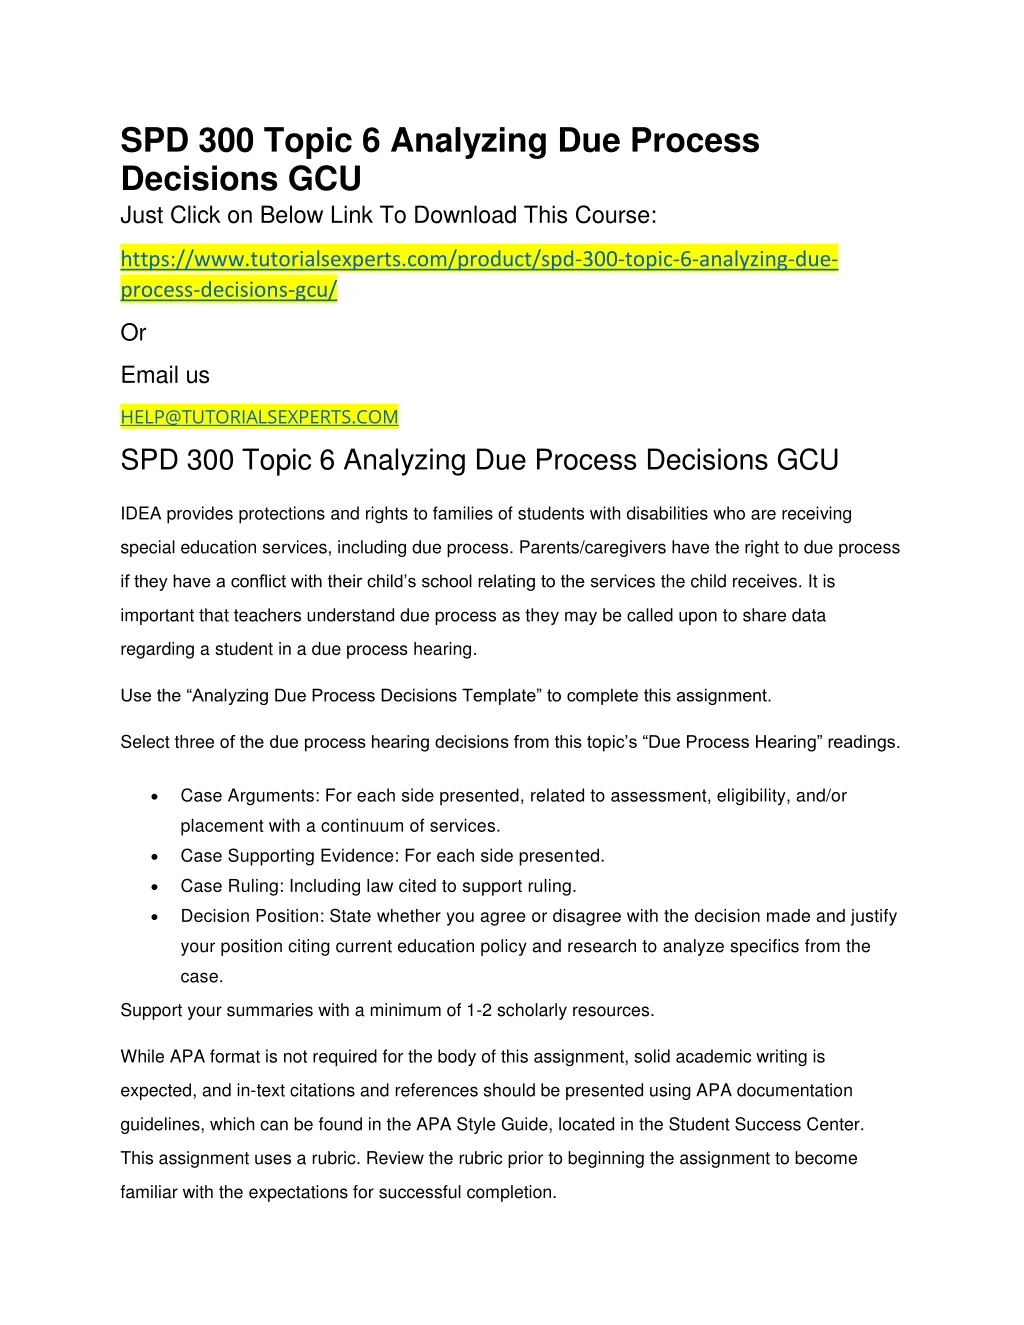 spd 300 topic 6 analyzing due process decisions